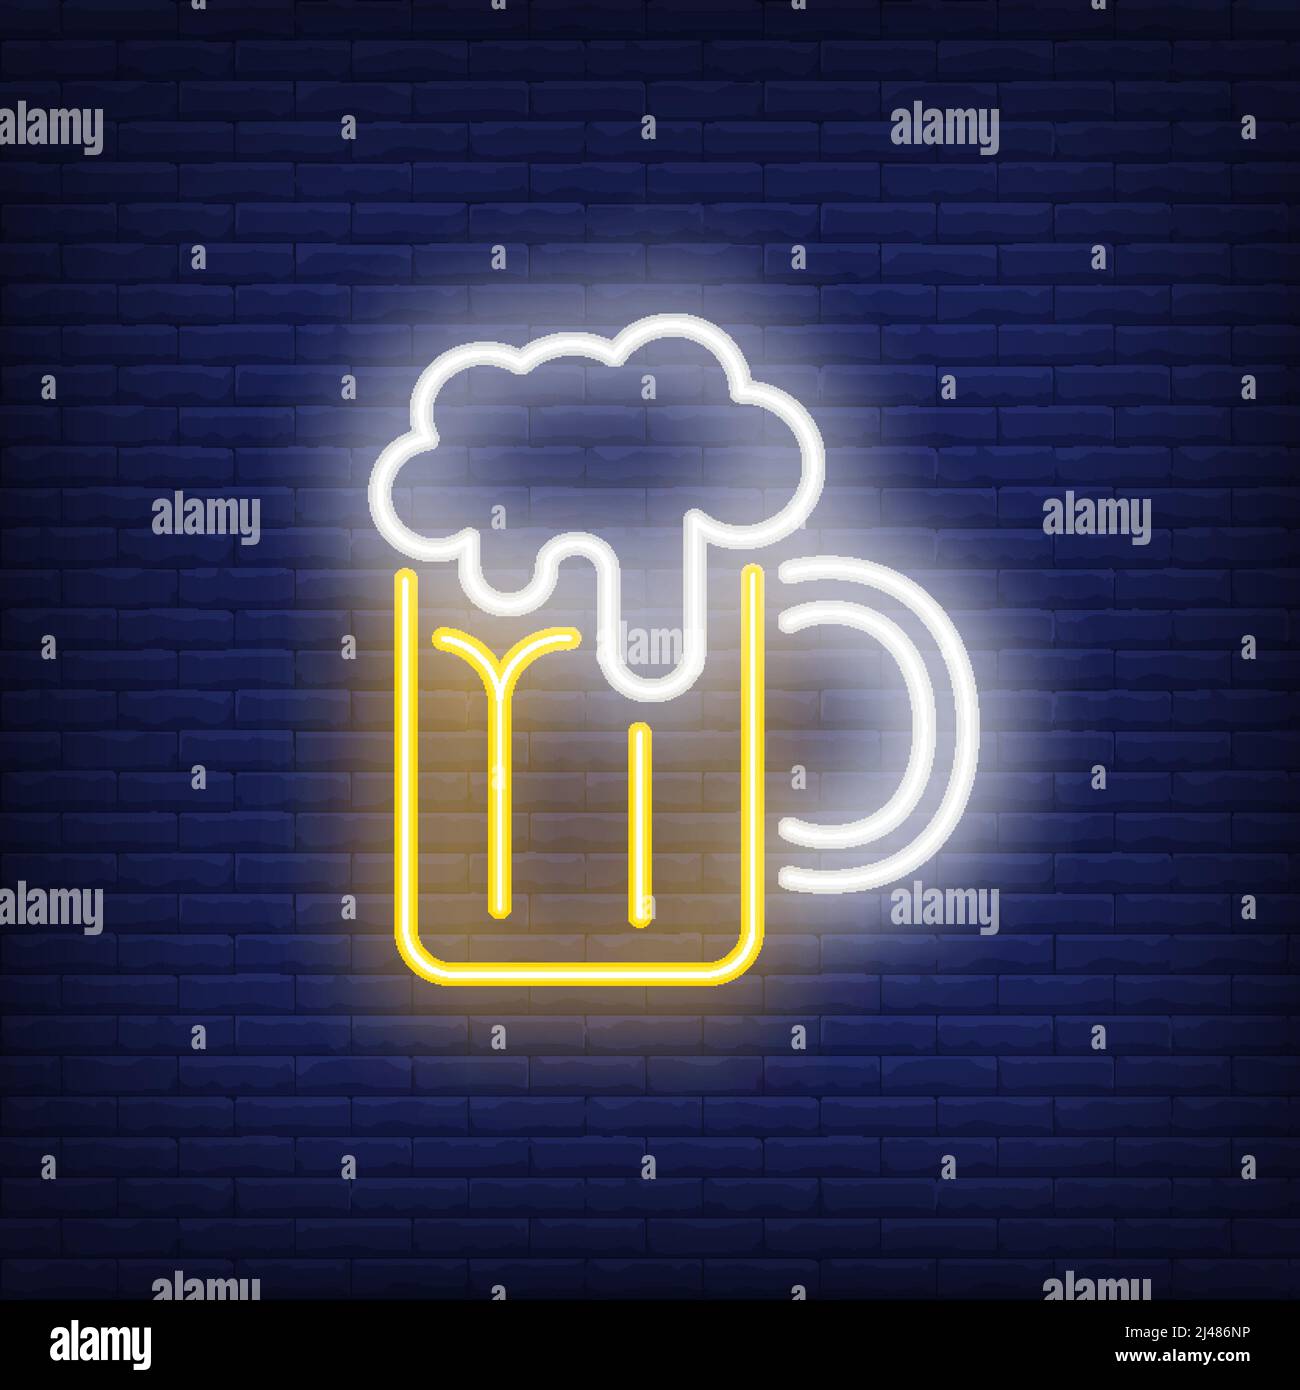 Beer mug with froth on brick background. Neon style illustration. Pub, bar, Oktoberfest. Alcohol banner. For holiday, beverage, nightlife concepts Stock Vector